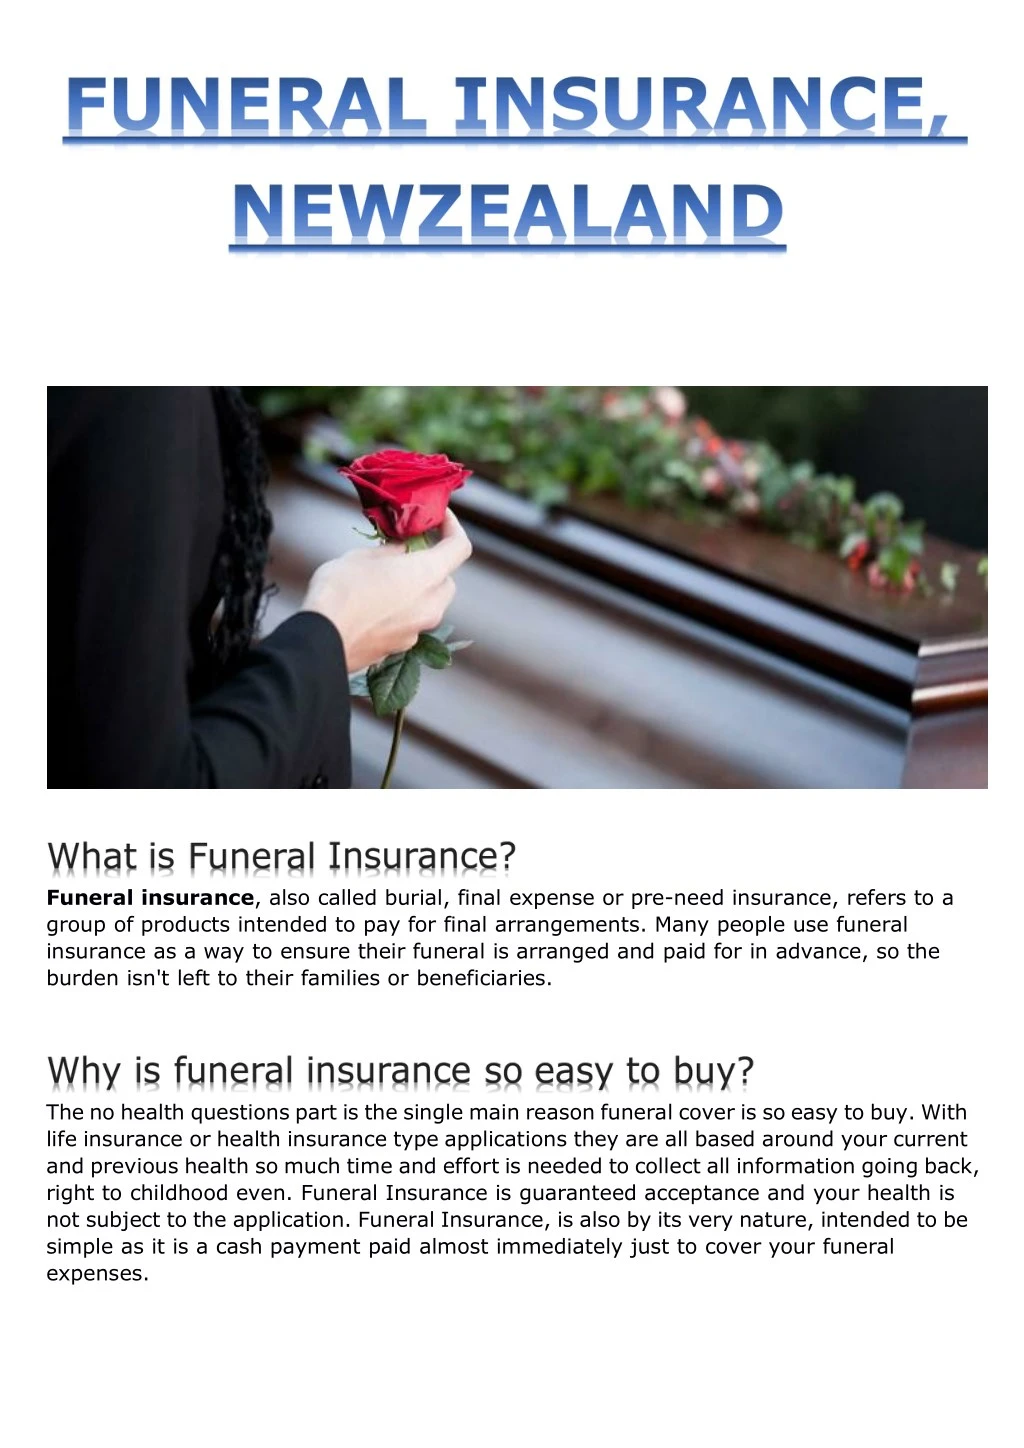 funeral insurance also called burial final